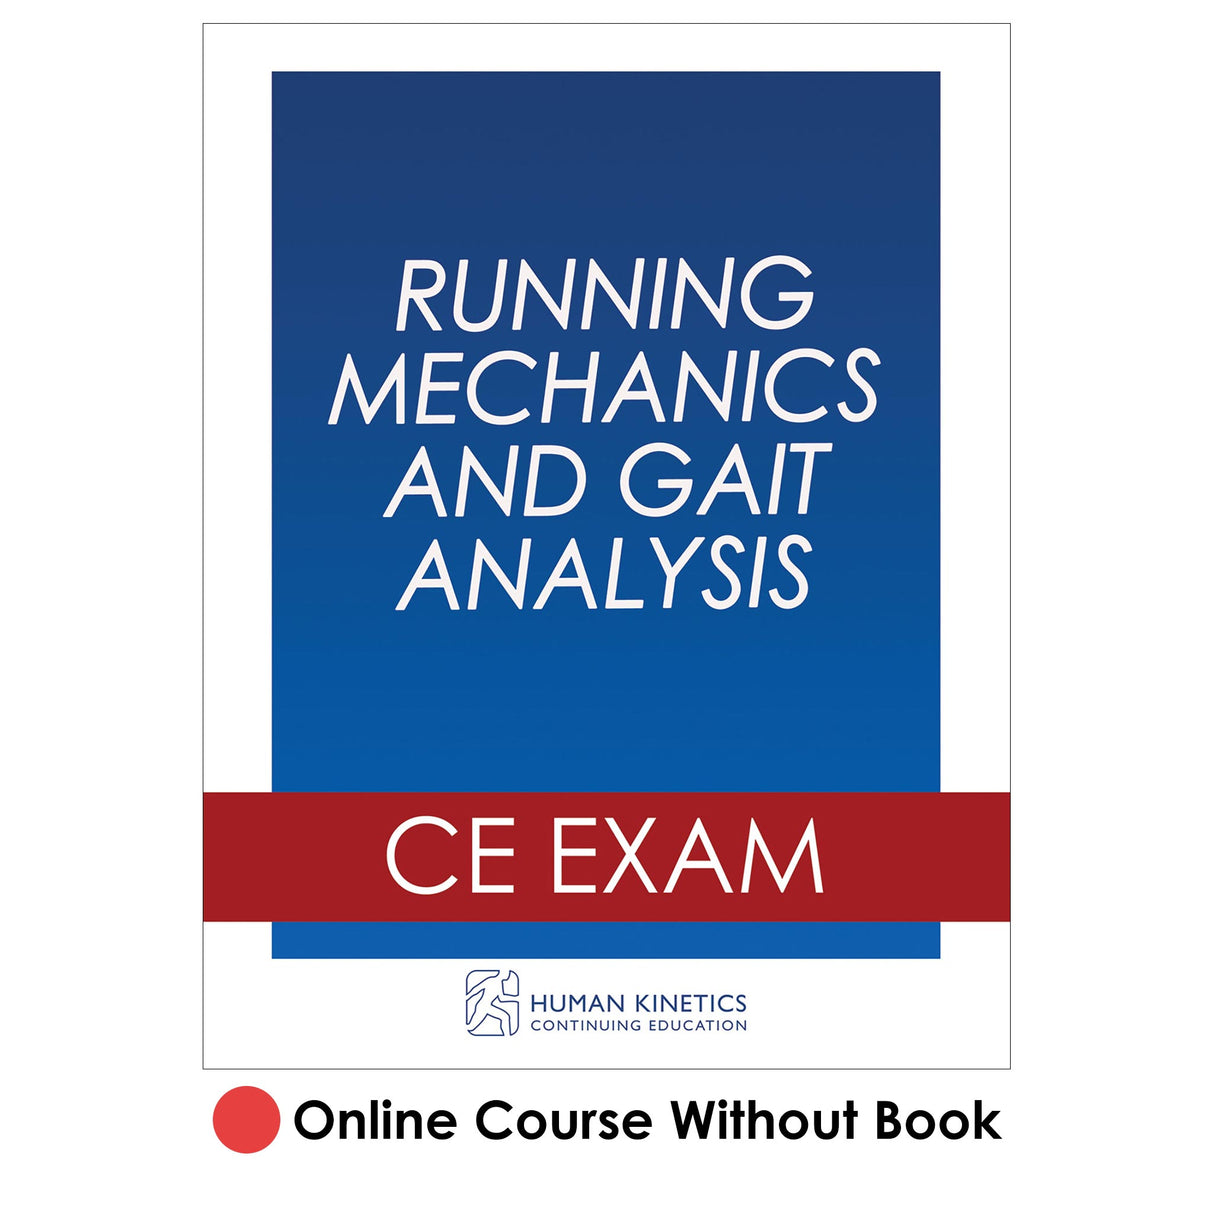 Running Mechanics and Gait Analysis Online CE Course Without Book